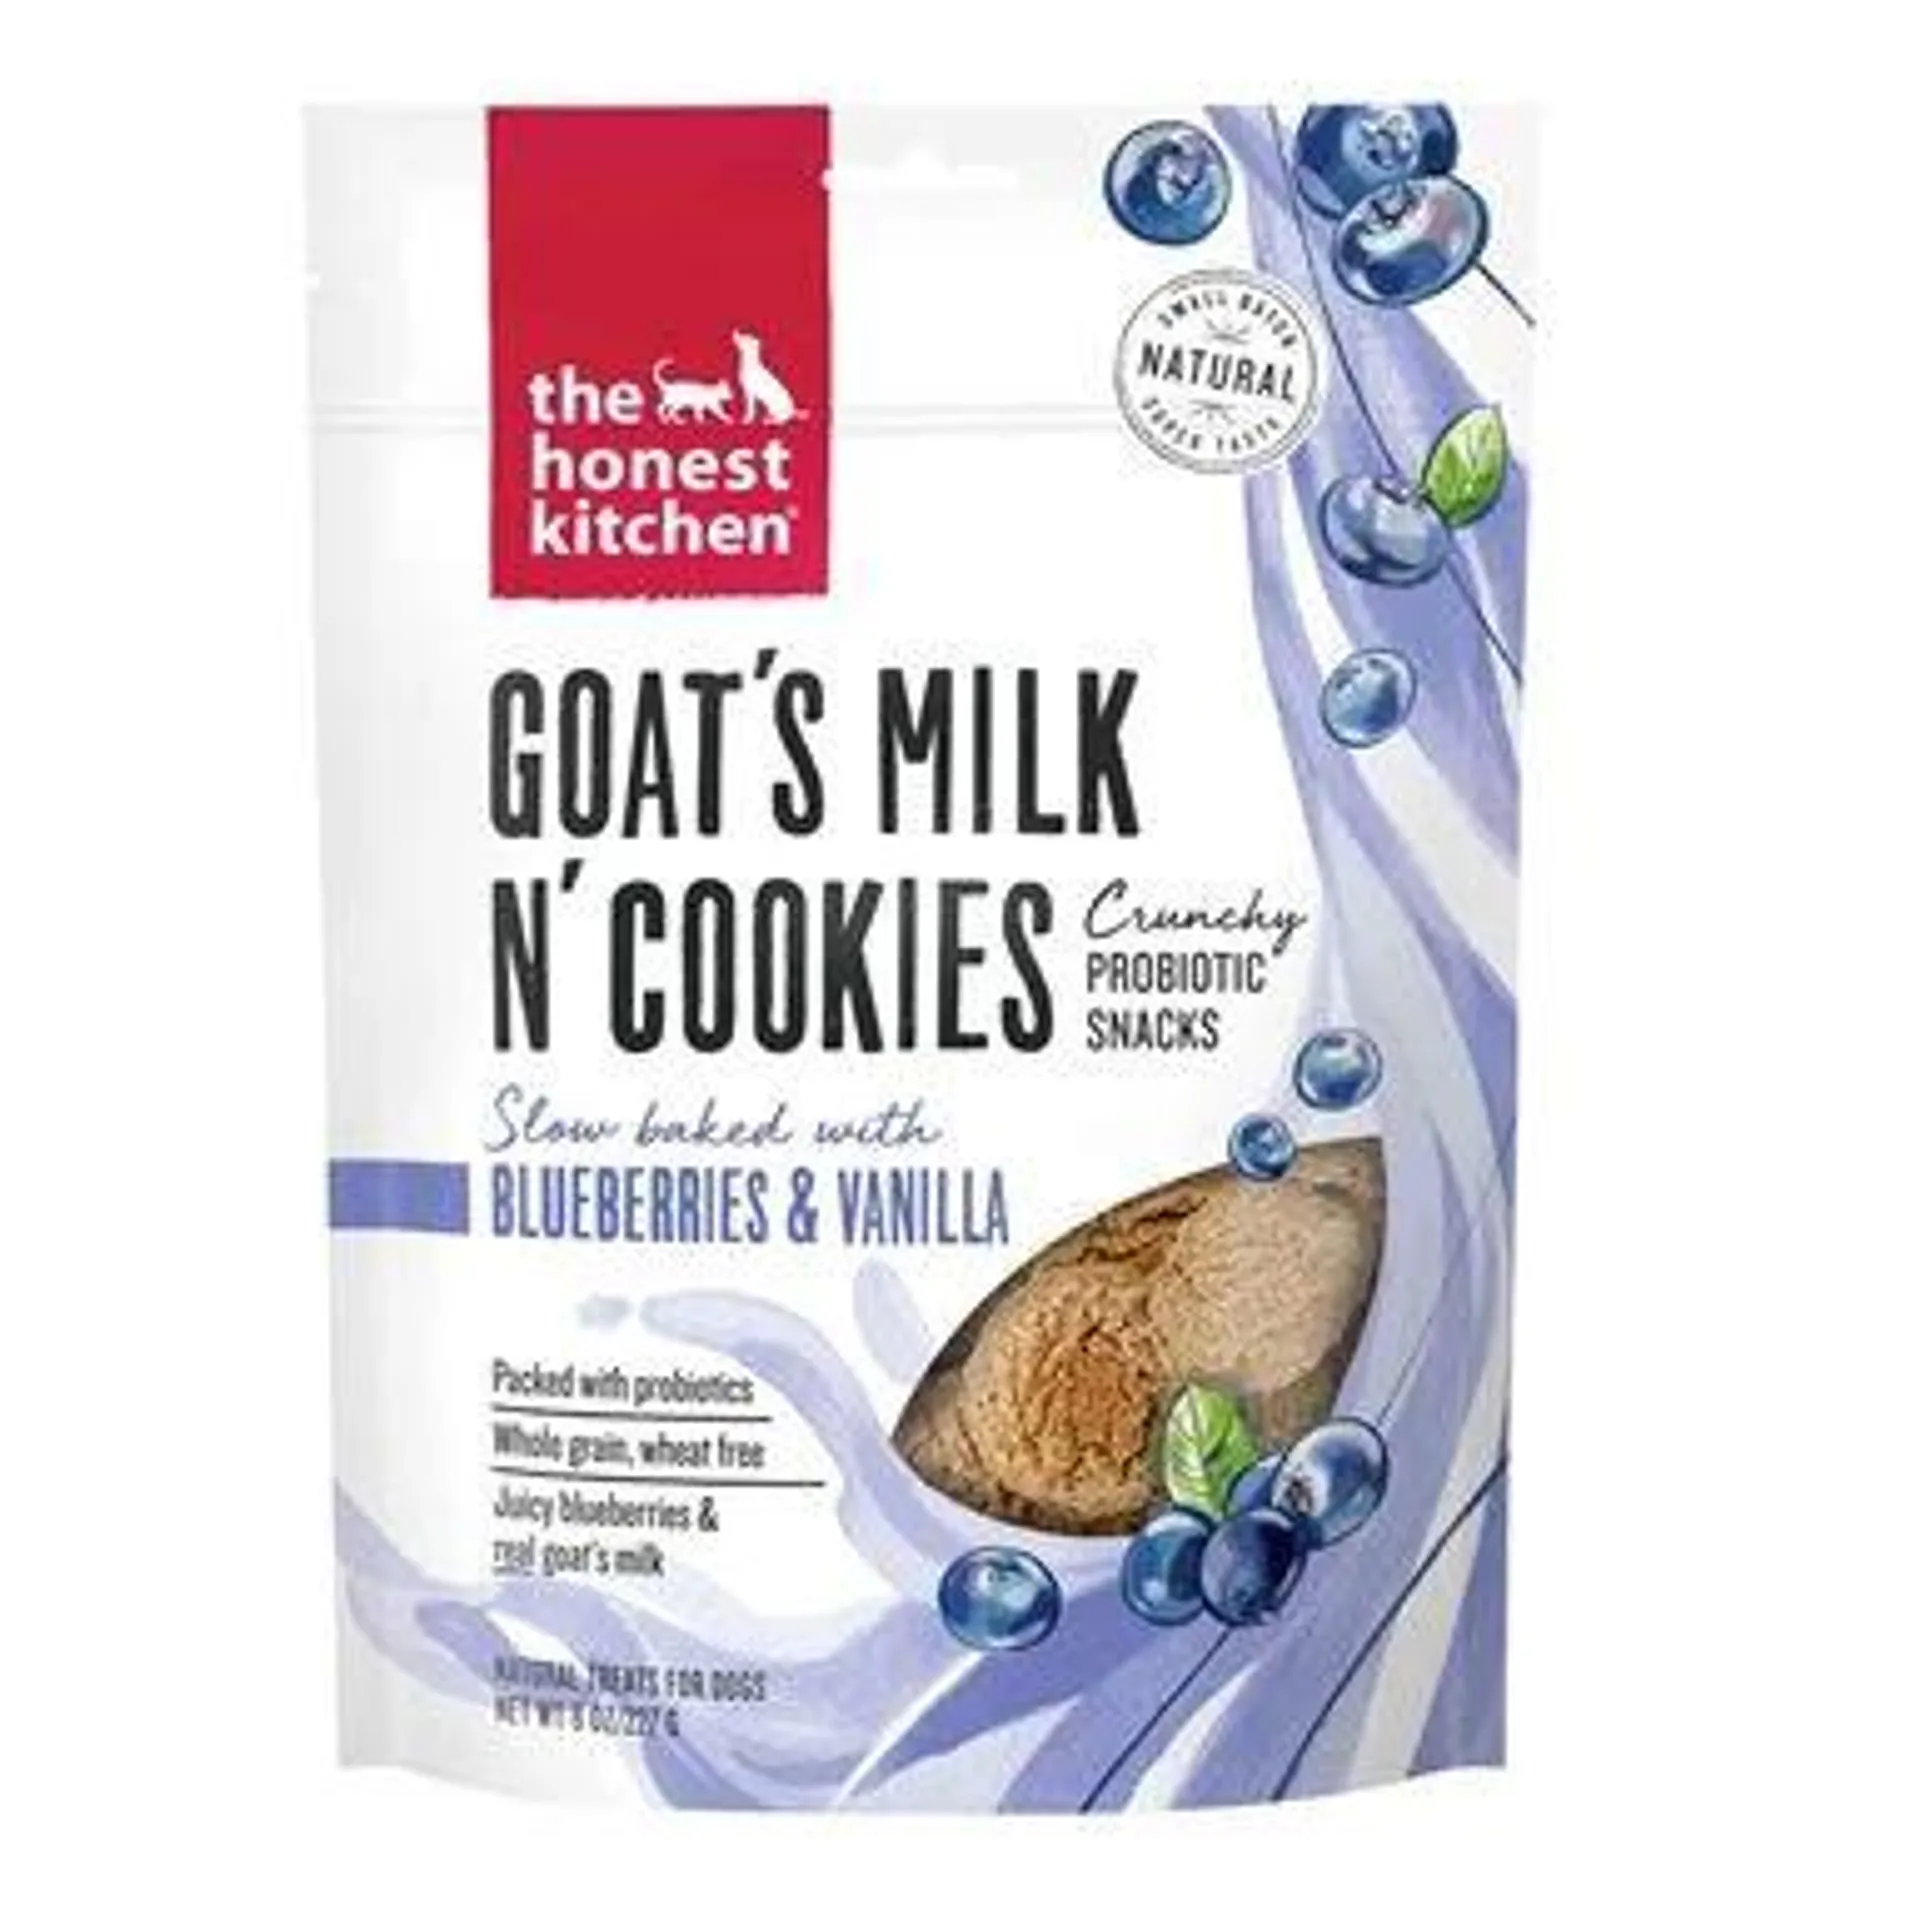 The Honest Kitchen Goat's Milk N' Cookies: Slow Baked with Blueberry & Vanilla Dog Treats, 8 Ounce Bag